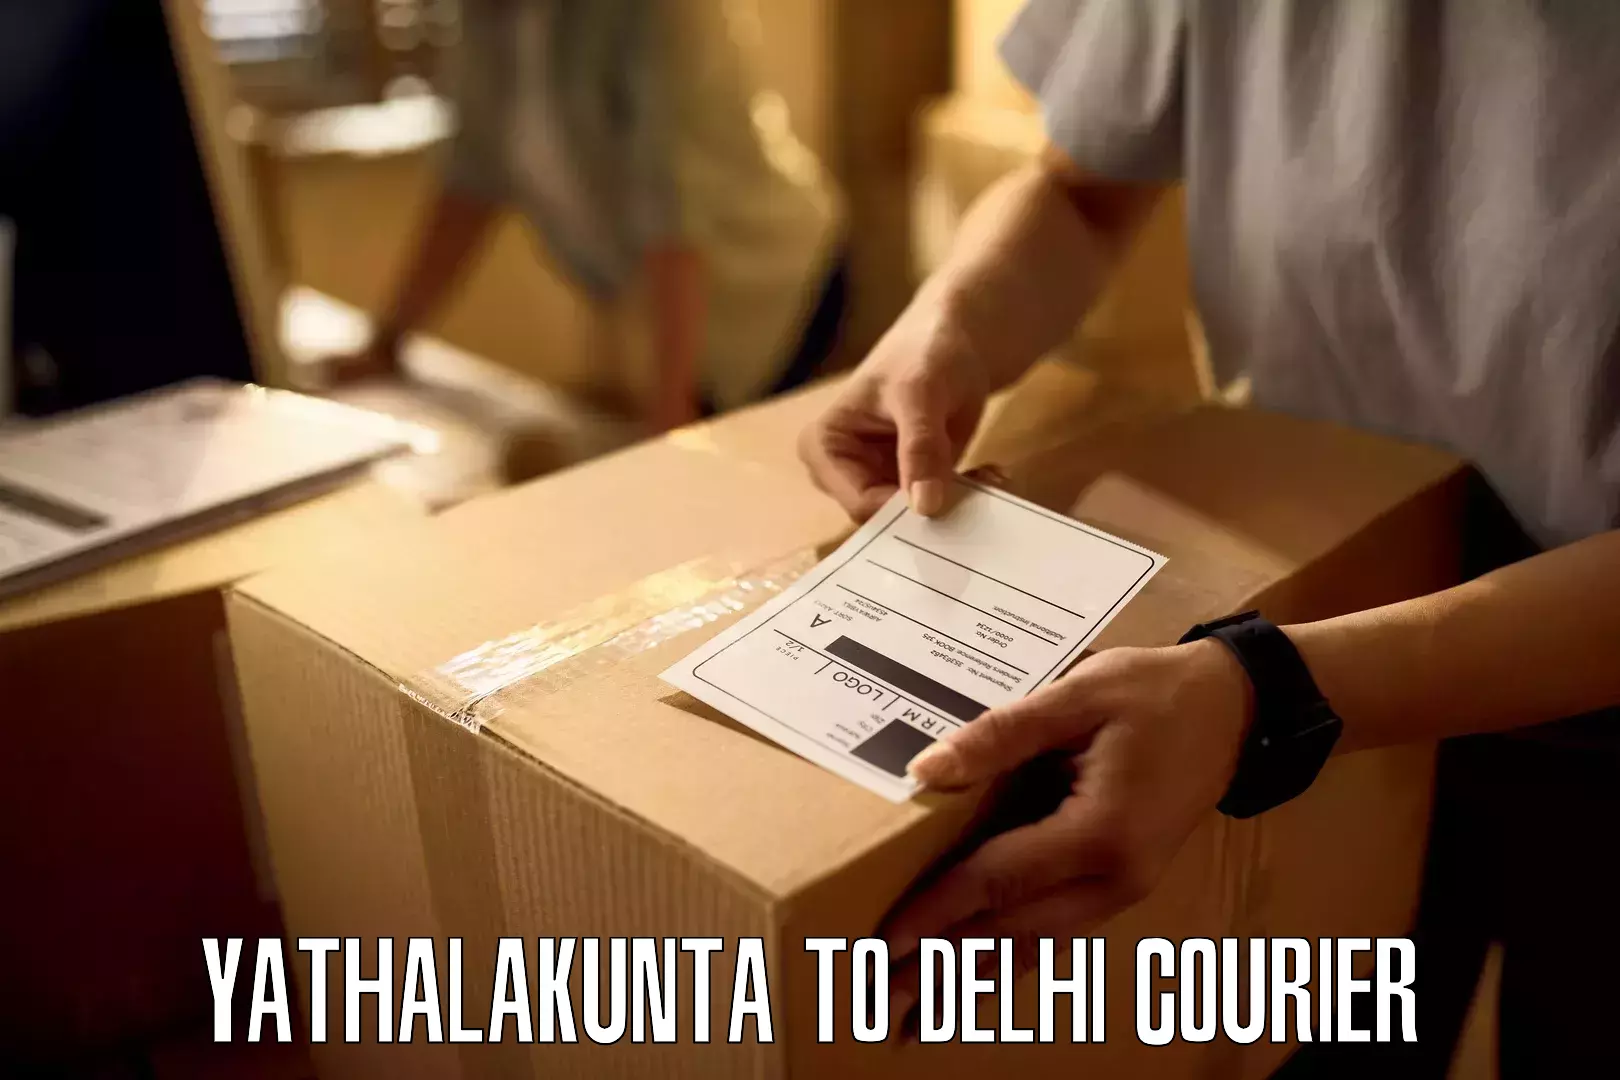 Residential courier service Yathalakunta to Delhi